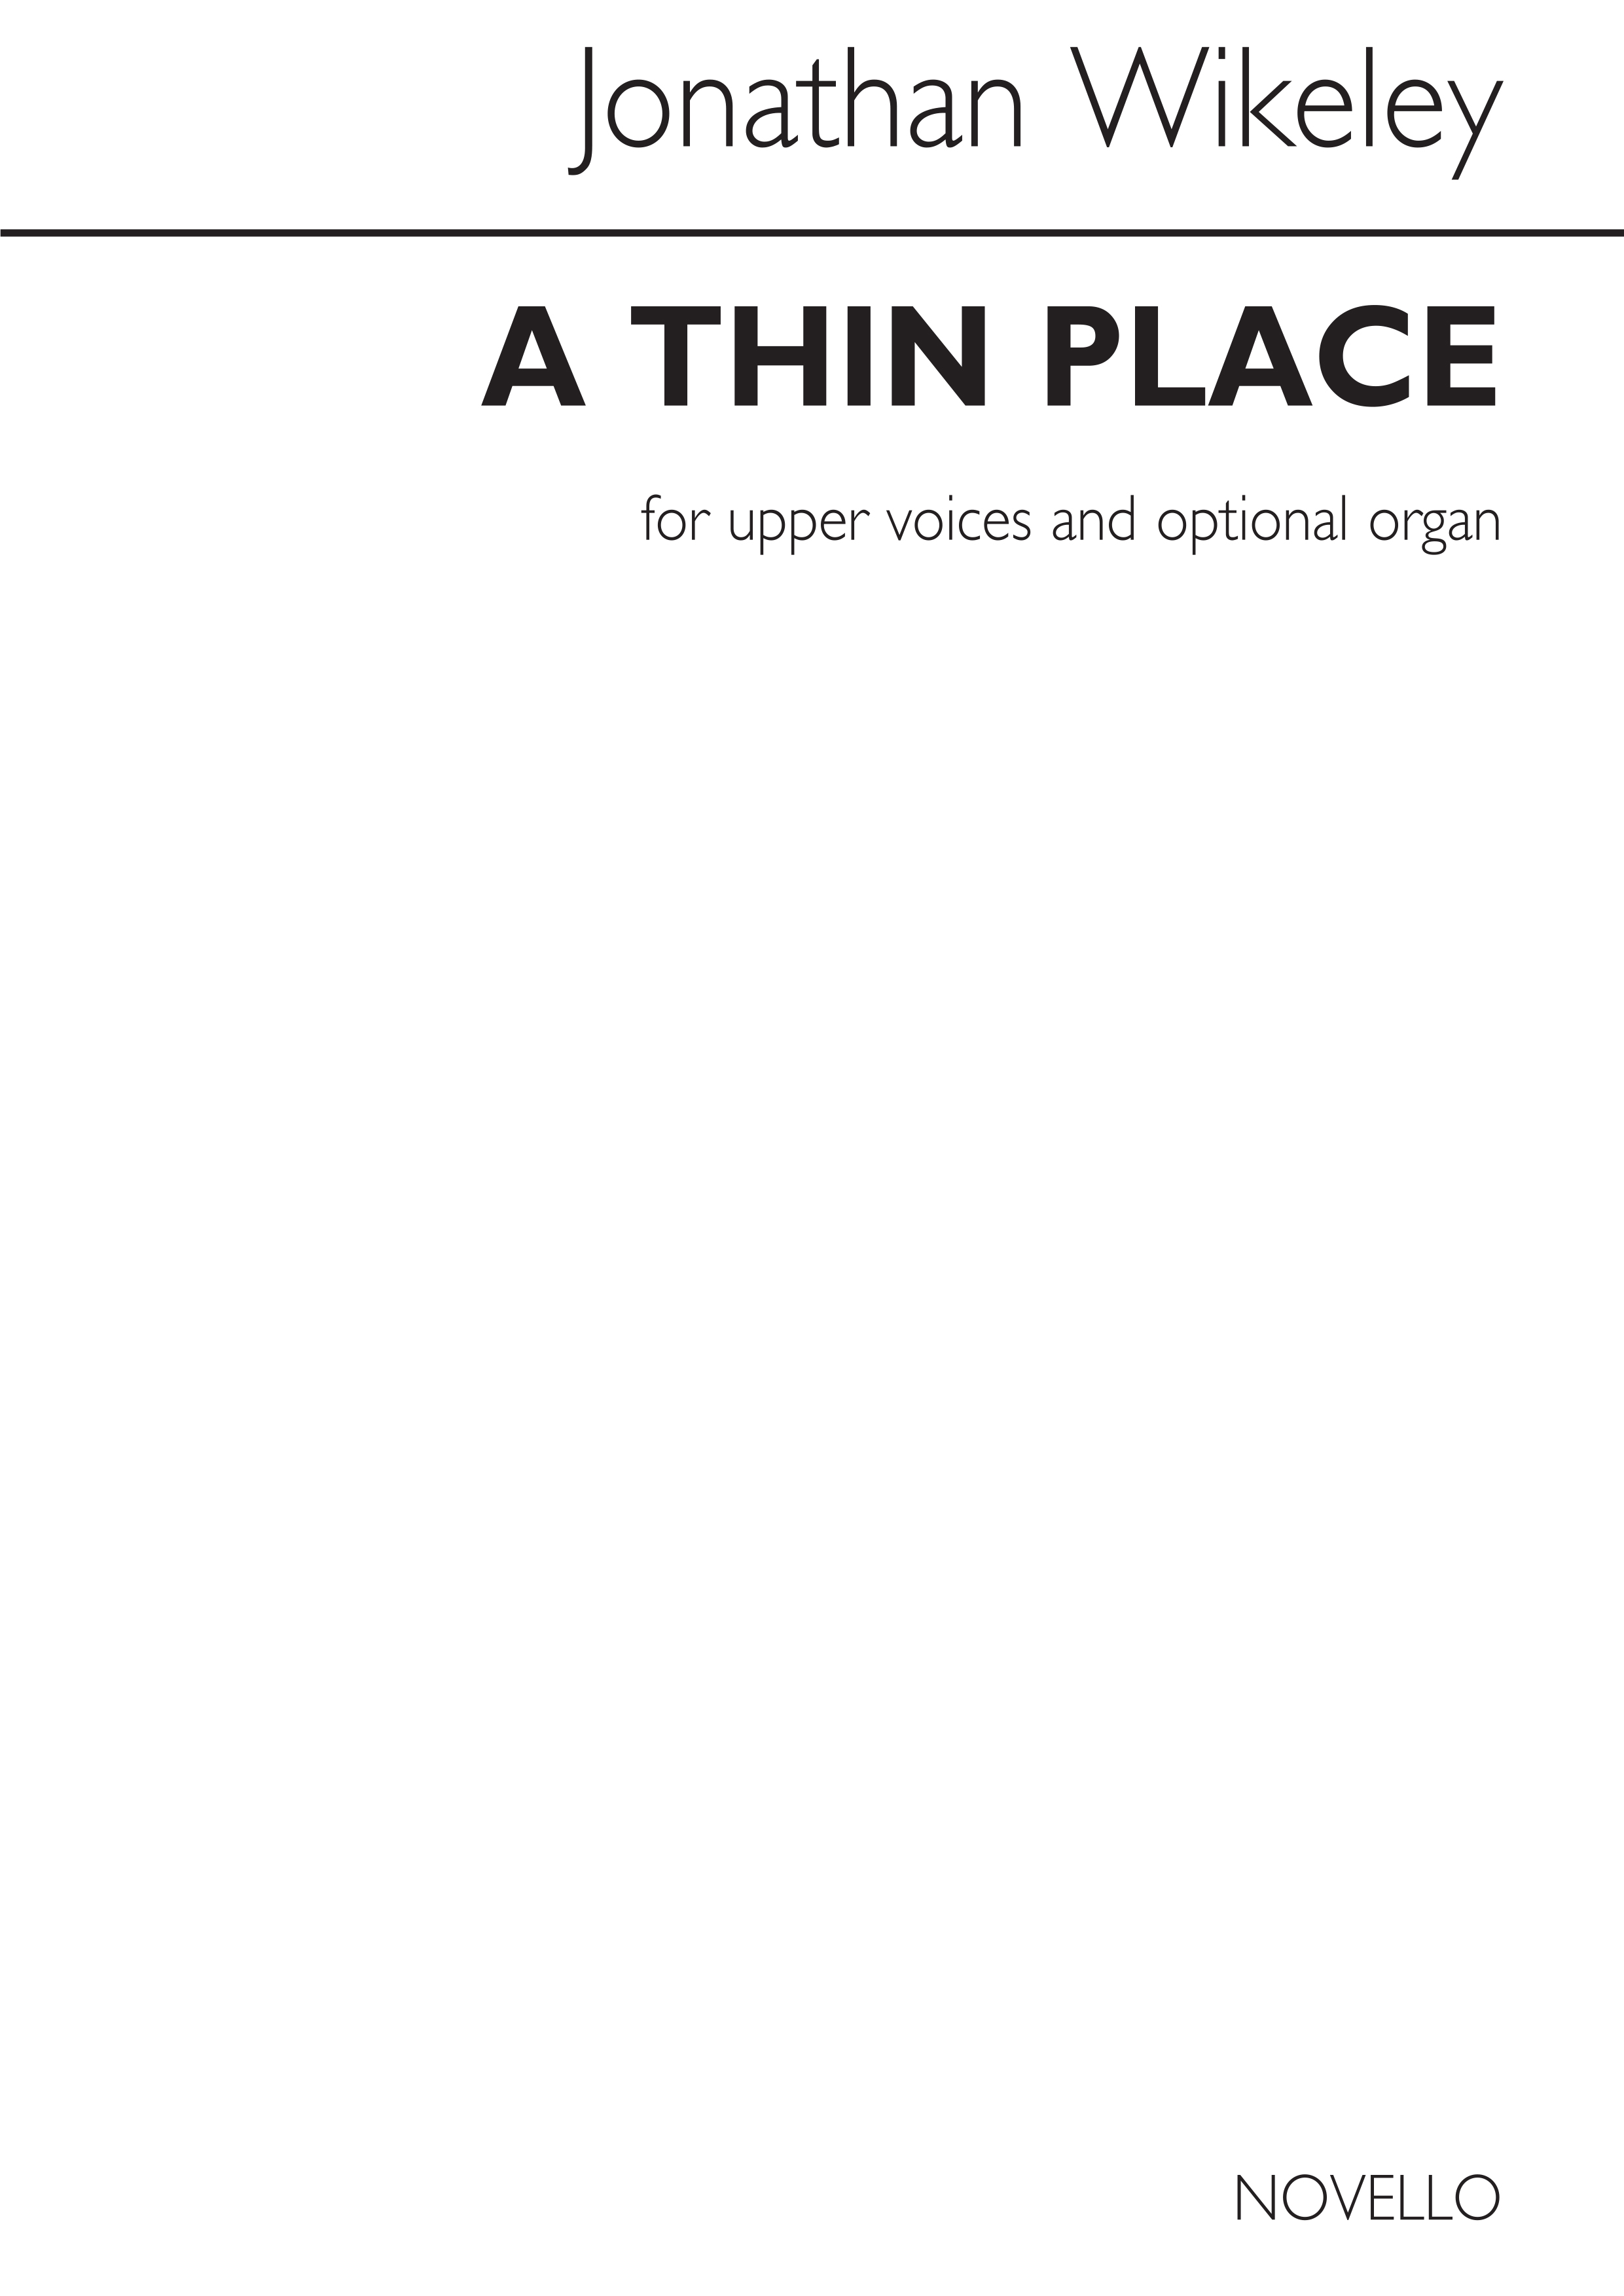 Jonathan Wikeley: Jonathan Wikeley: A Thin Place: SSAA: Vocal Score